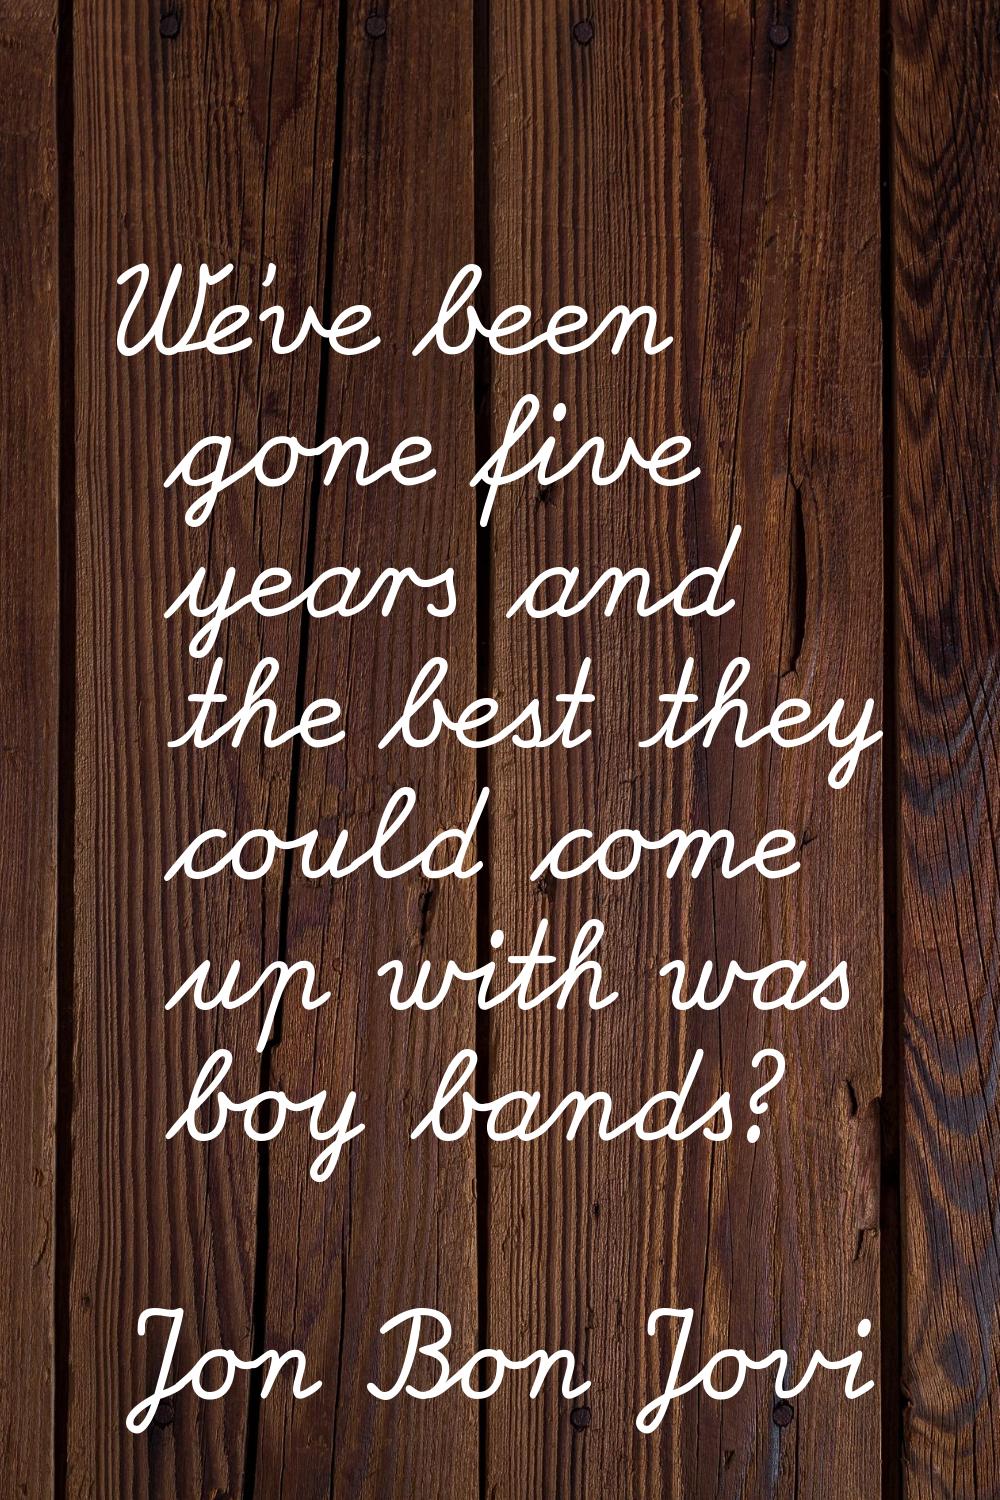 We've been gone five years and the best they could come up with was boy bands?